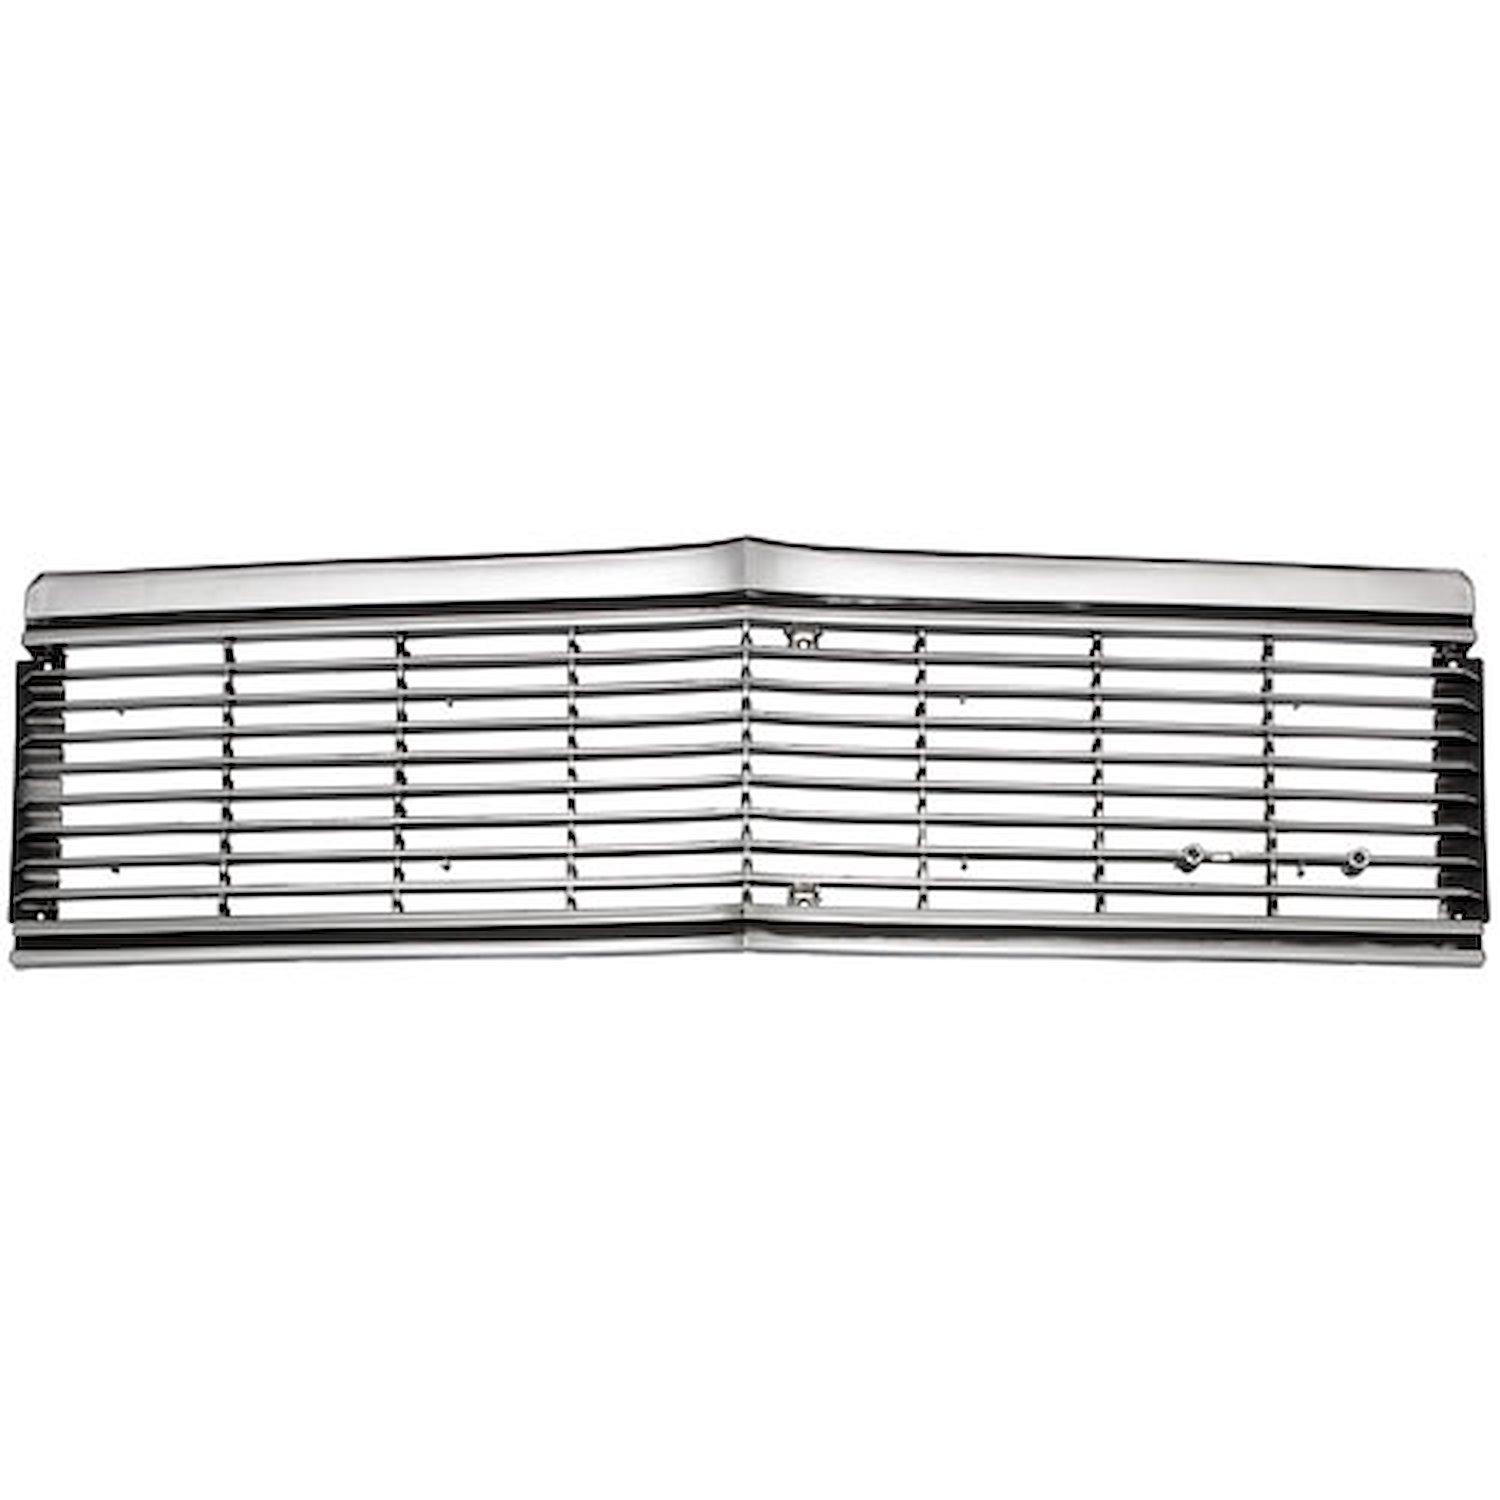 Grille for 1981 Chevy Chevelle, El Camino [Chrome Plated]